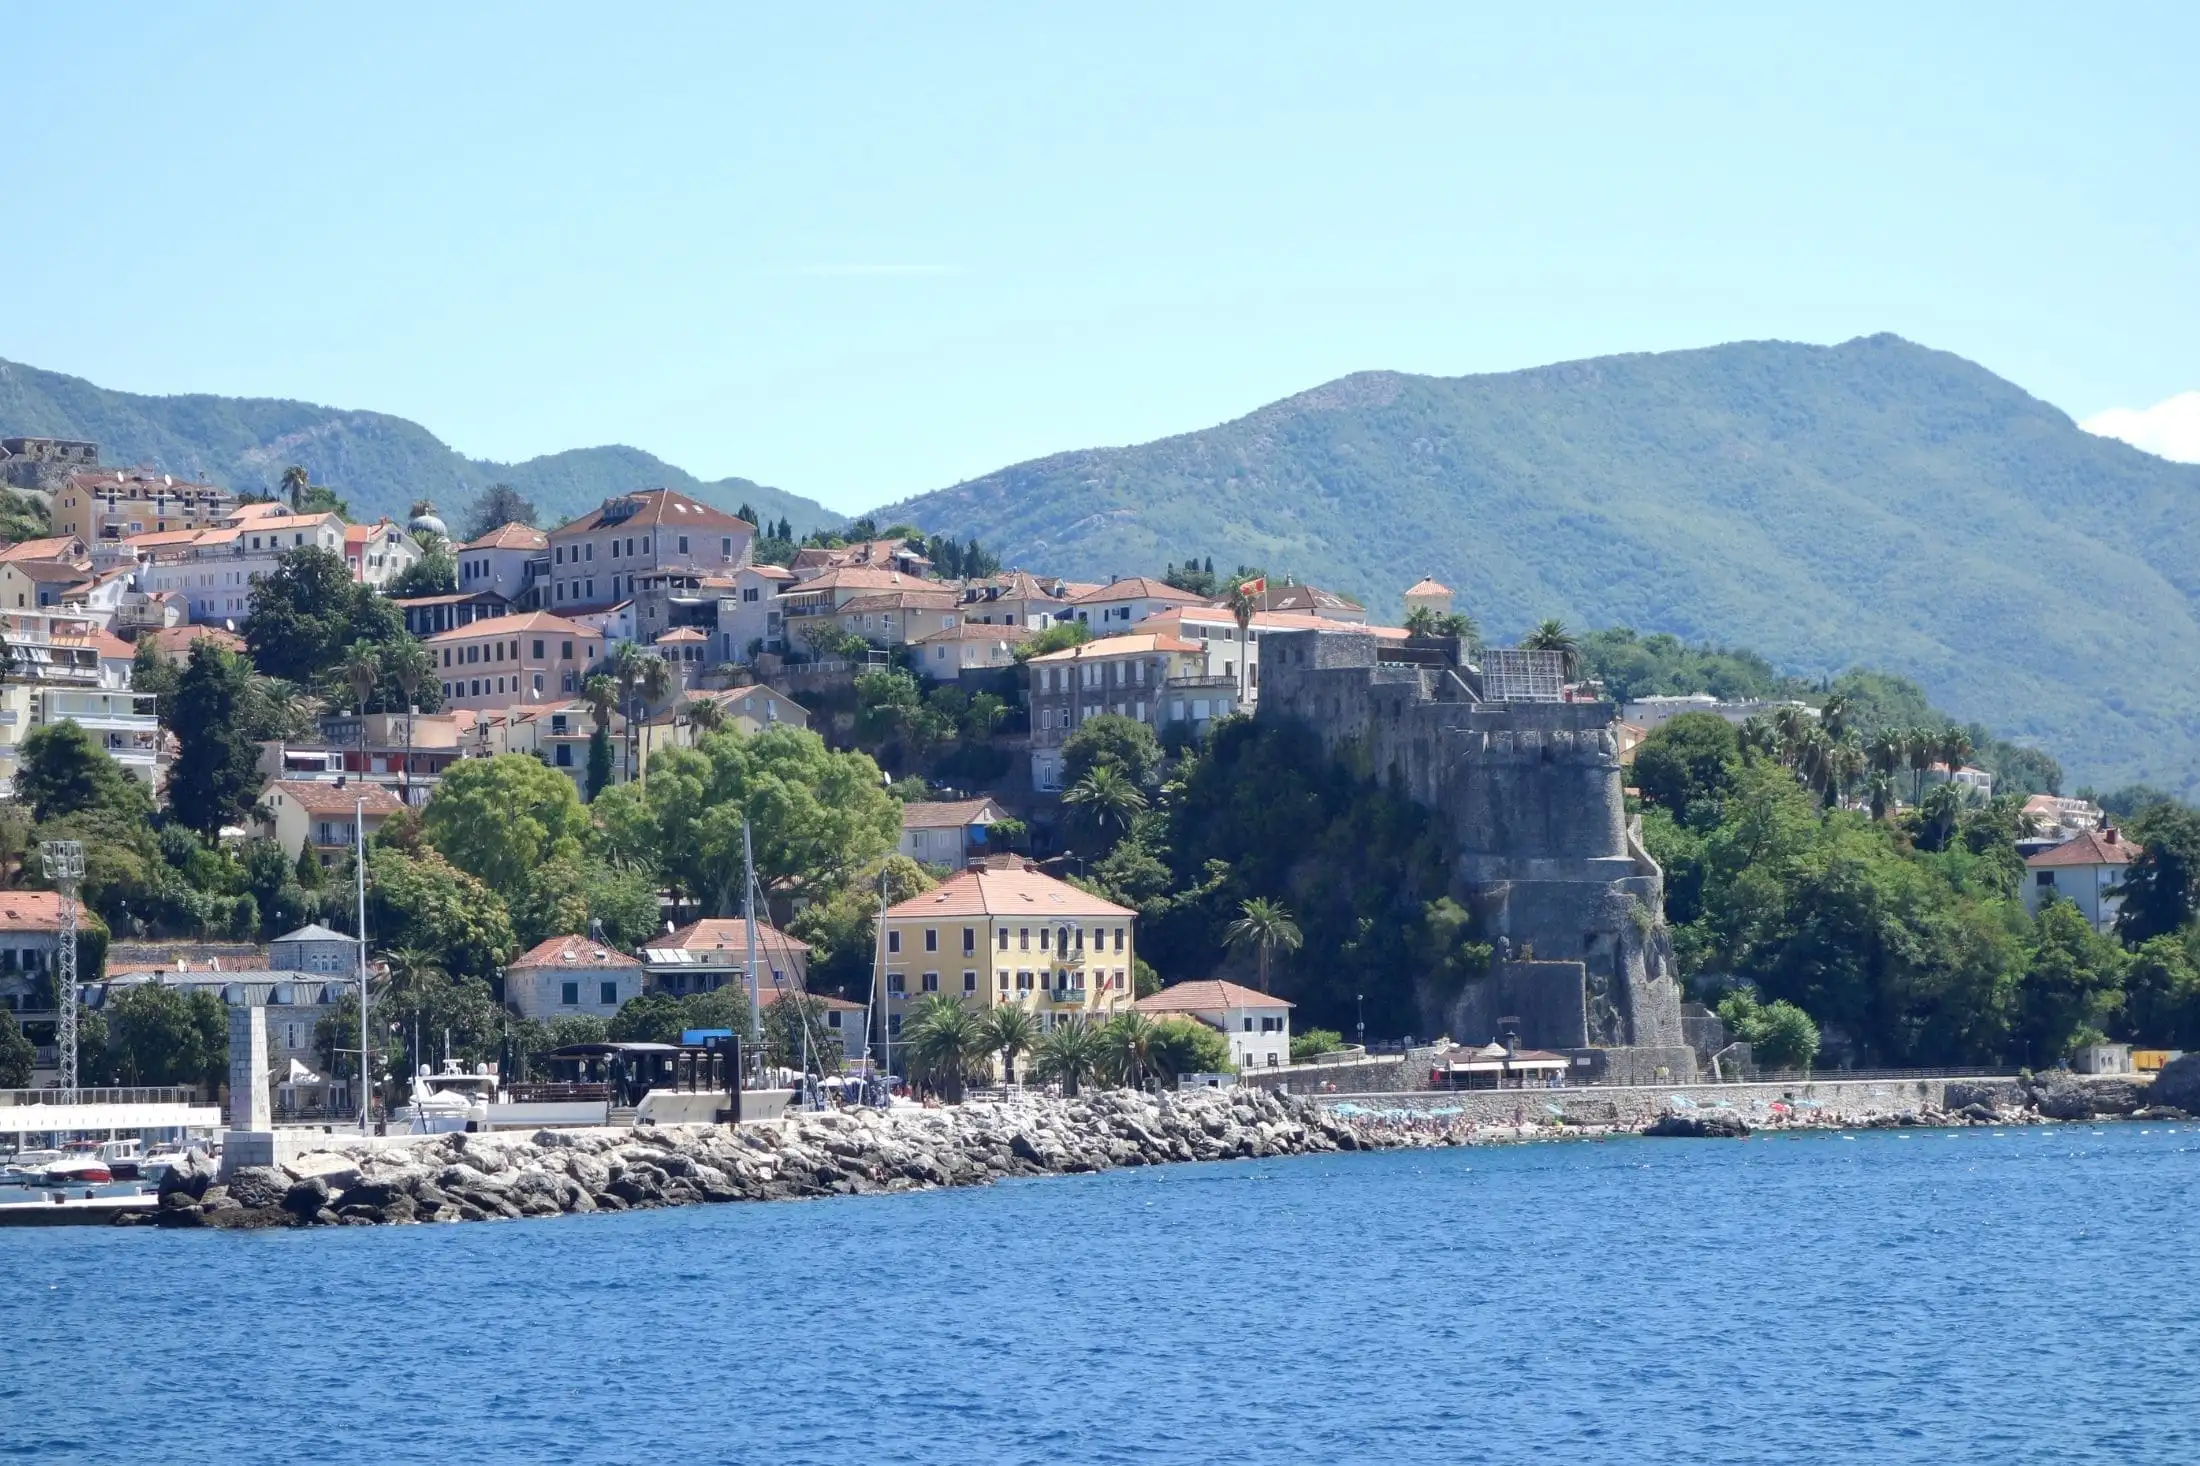 A photo of Herceg Novi featuring the Forte Mare fortress